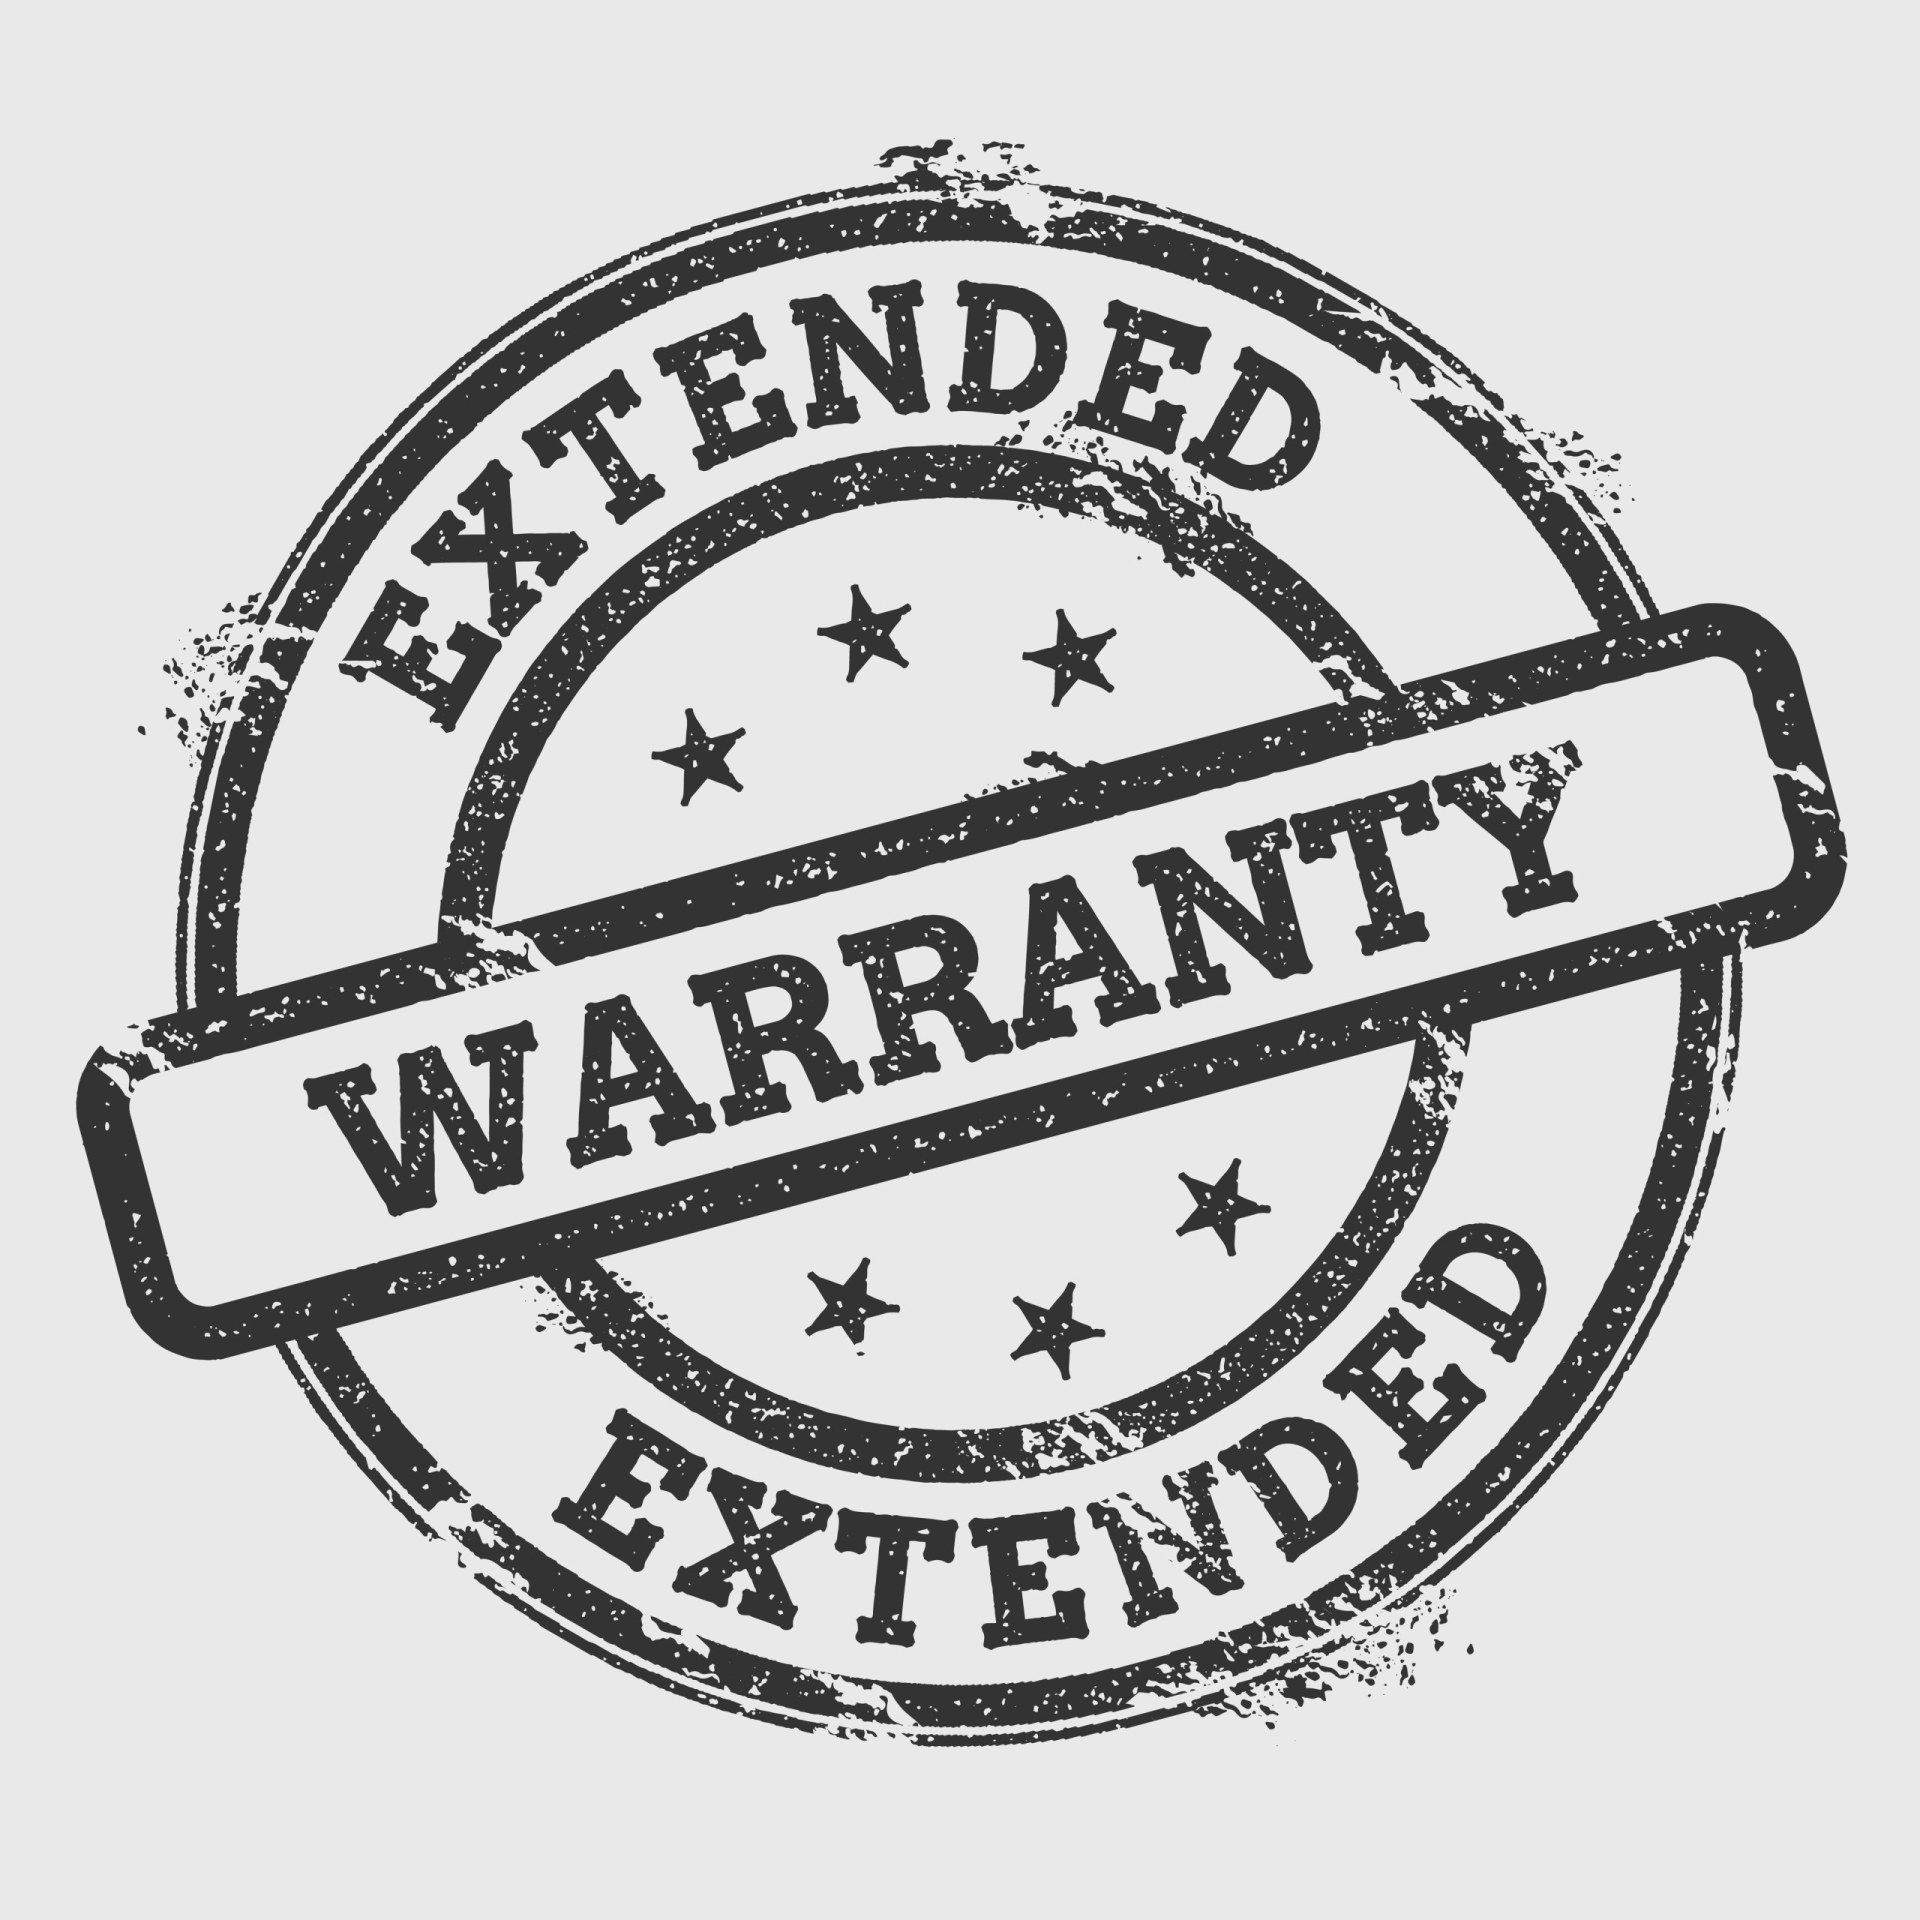 Extended warranty rubber stamp isolated on white background. Grunge round seal with text, ink texture and splatter and blots, vector illustration.